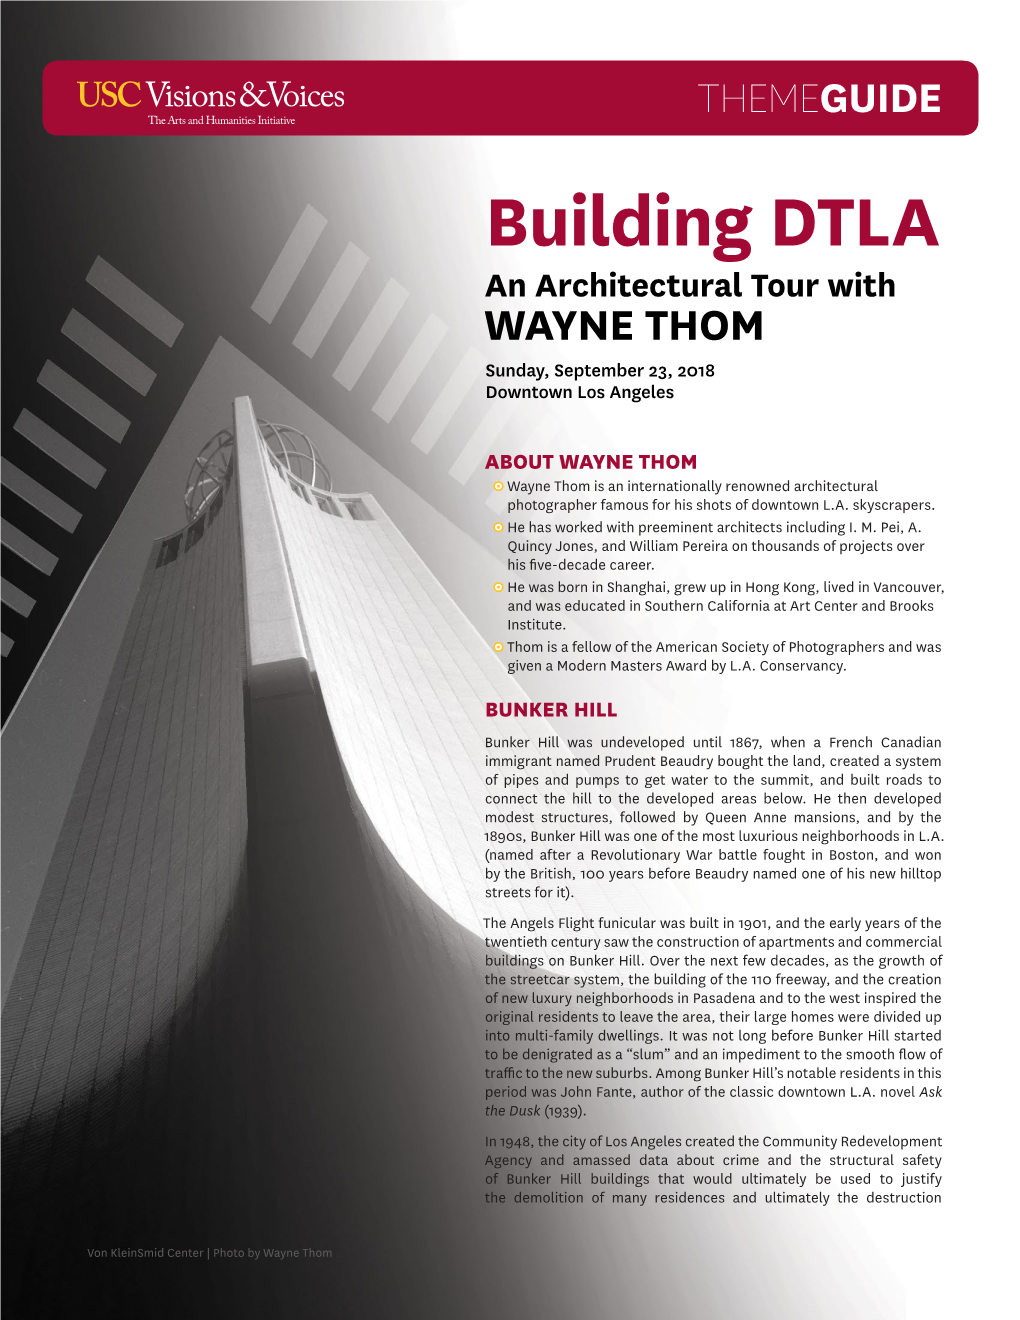 Building DTLA an Architectural Tour with WAYNE THOM Sunday, September 23, 2018 Downtown Los Angeles